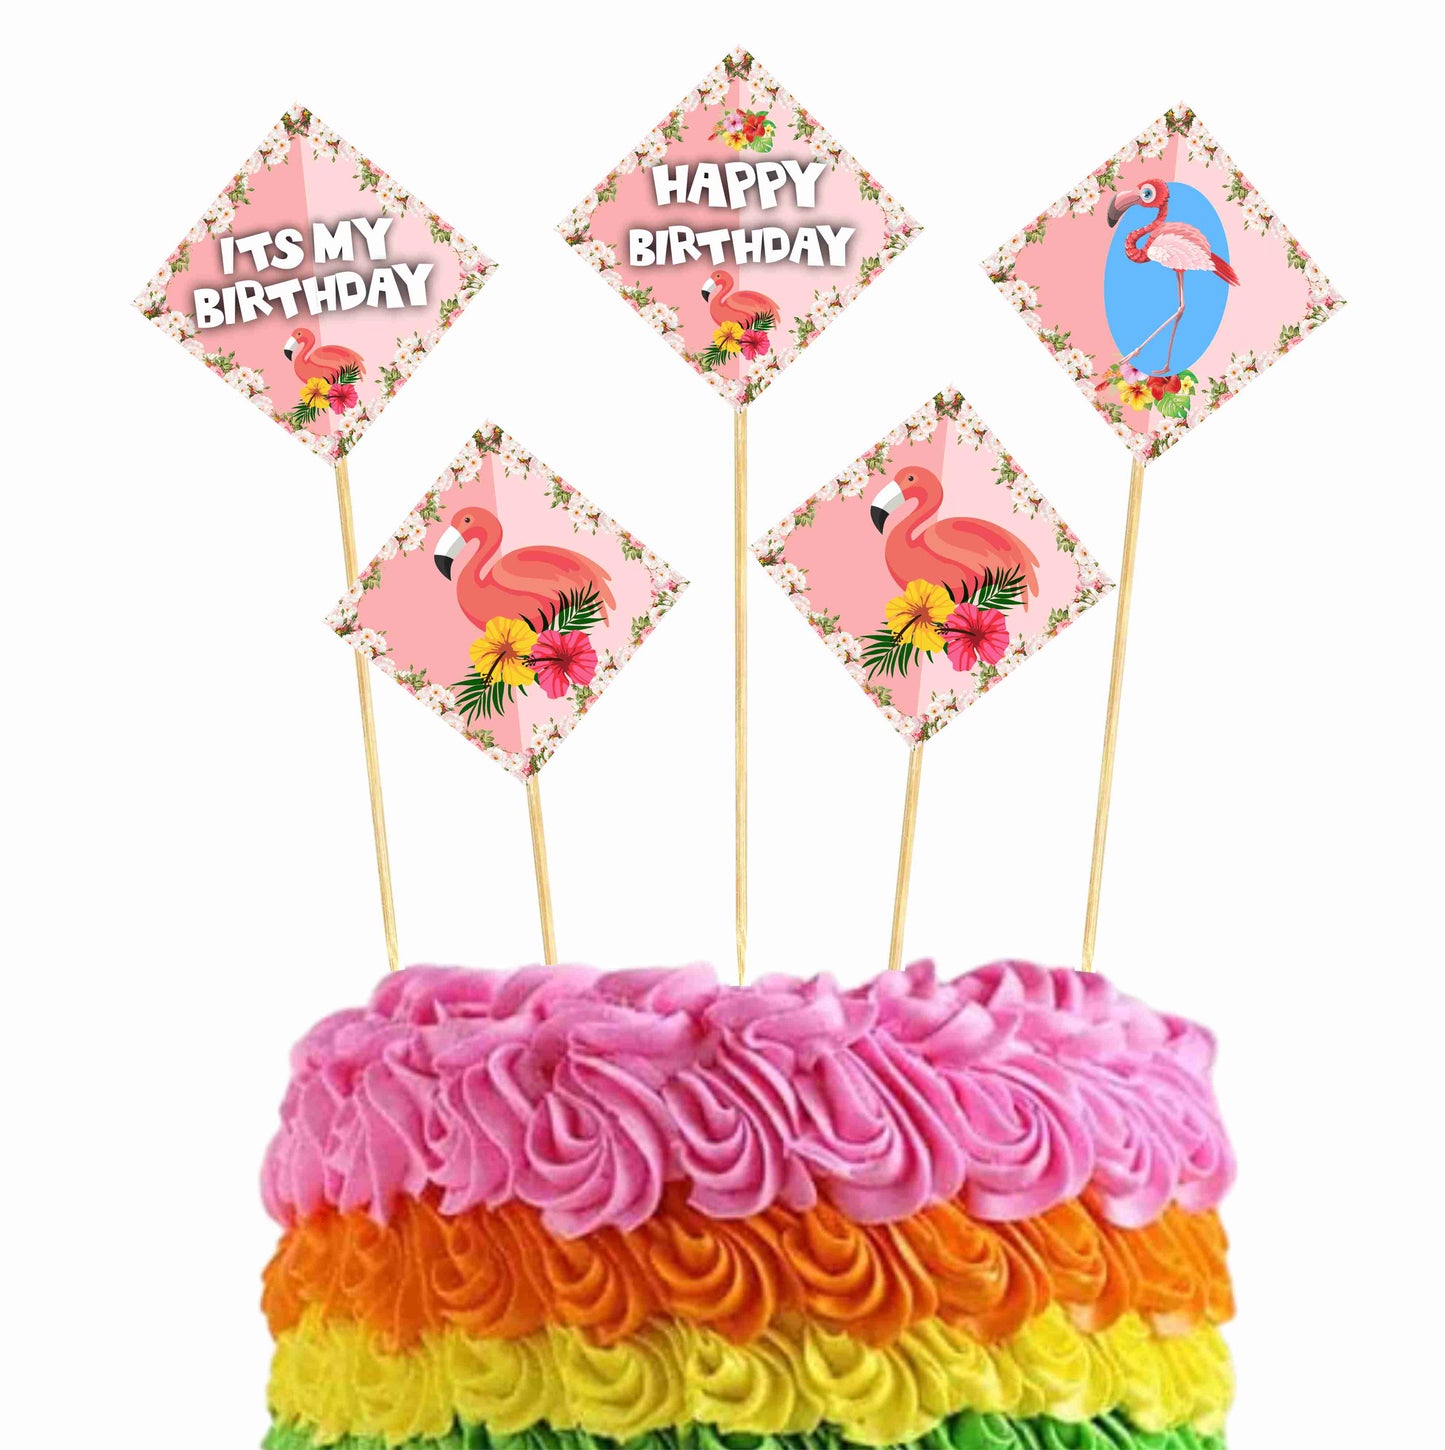 Flamingo Theme Cake Topper Pack of 10 Nos for Birthday Cake Decoration Theme Party Item For Boys Girls Adults Birthday Theme Decor